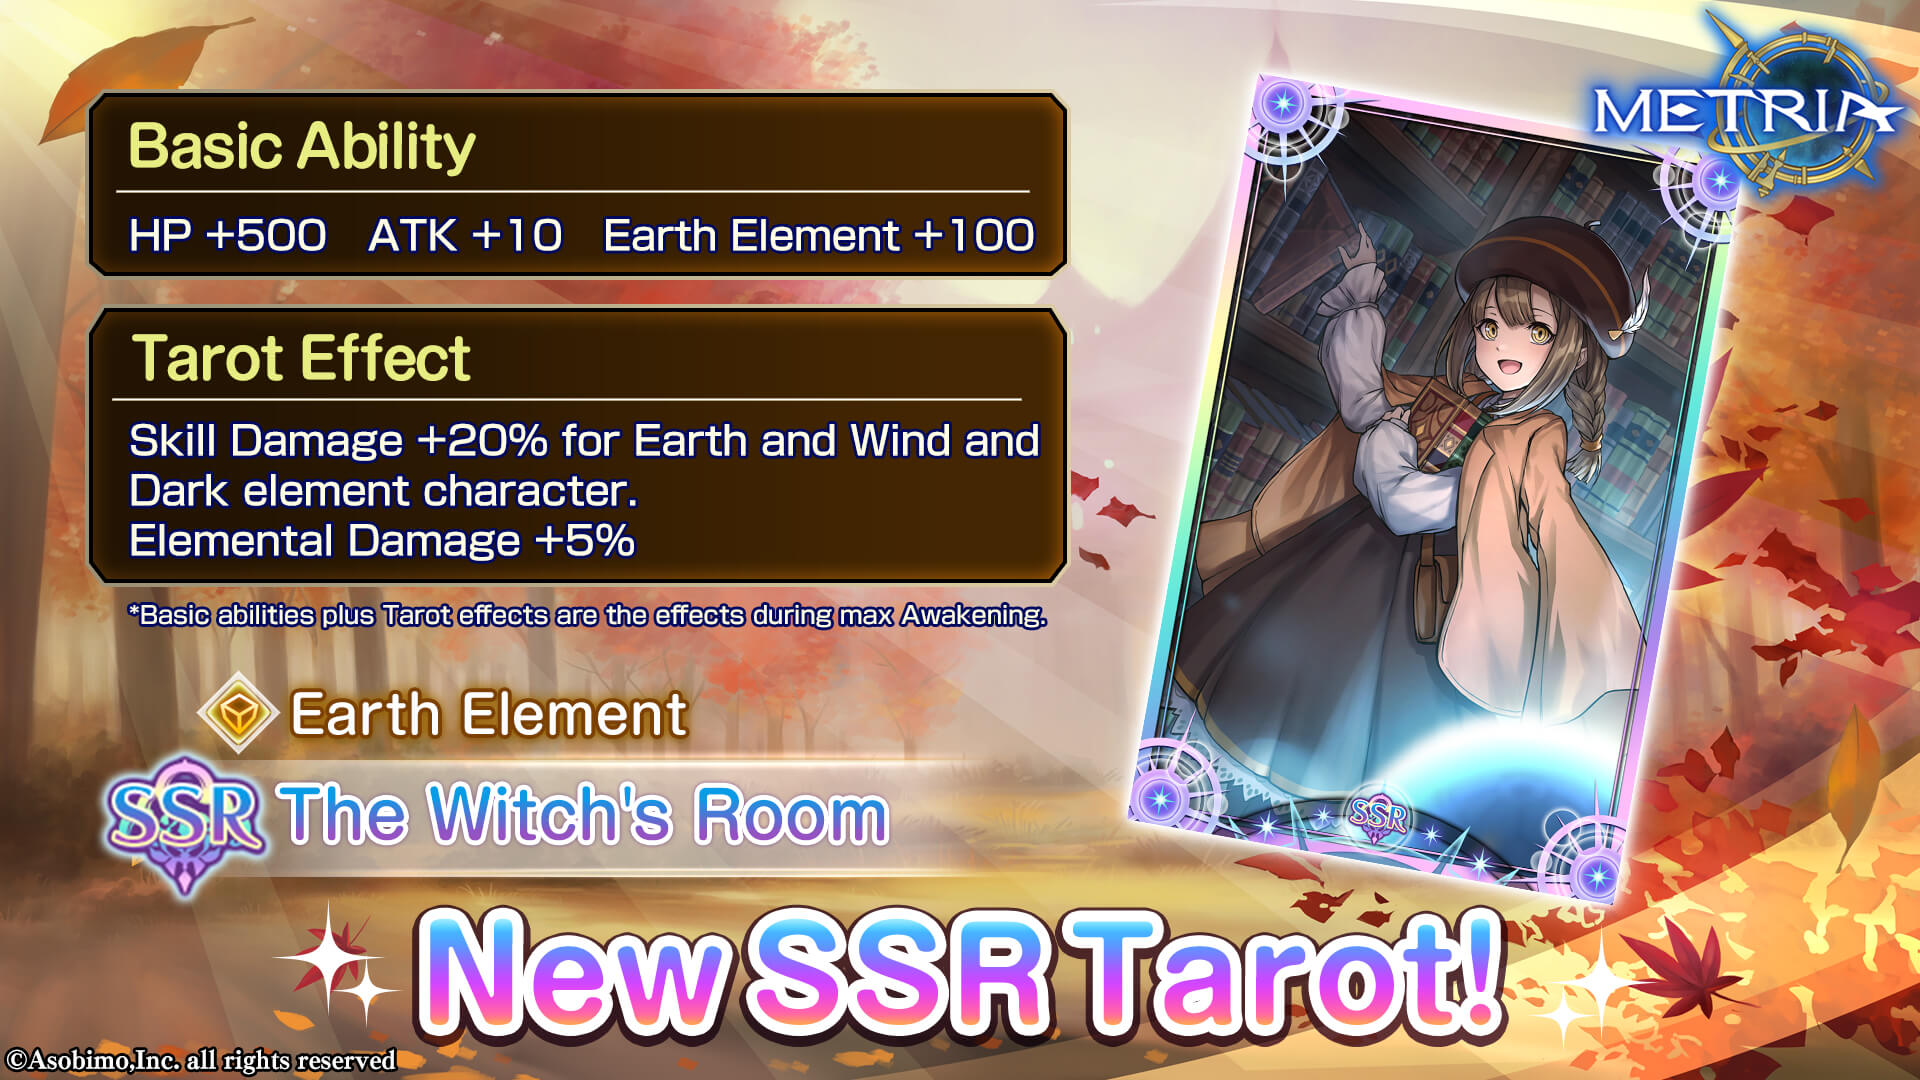 Earth Element New SSR Tarot: "The Witch's Room" Available for Purchase!